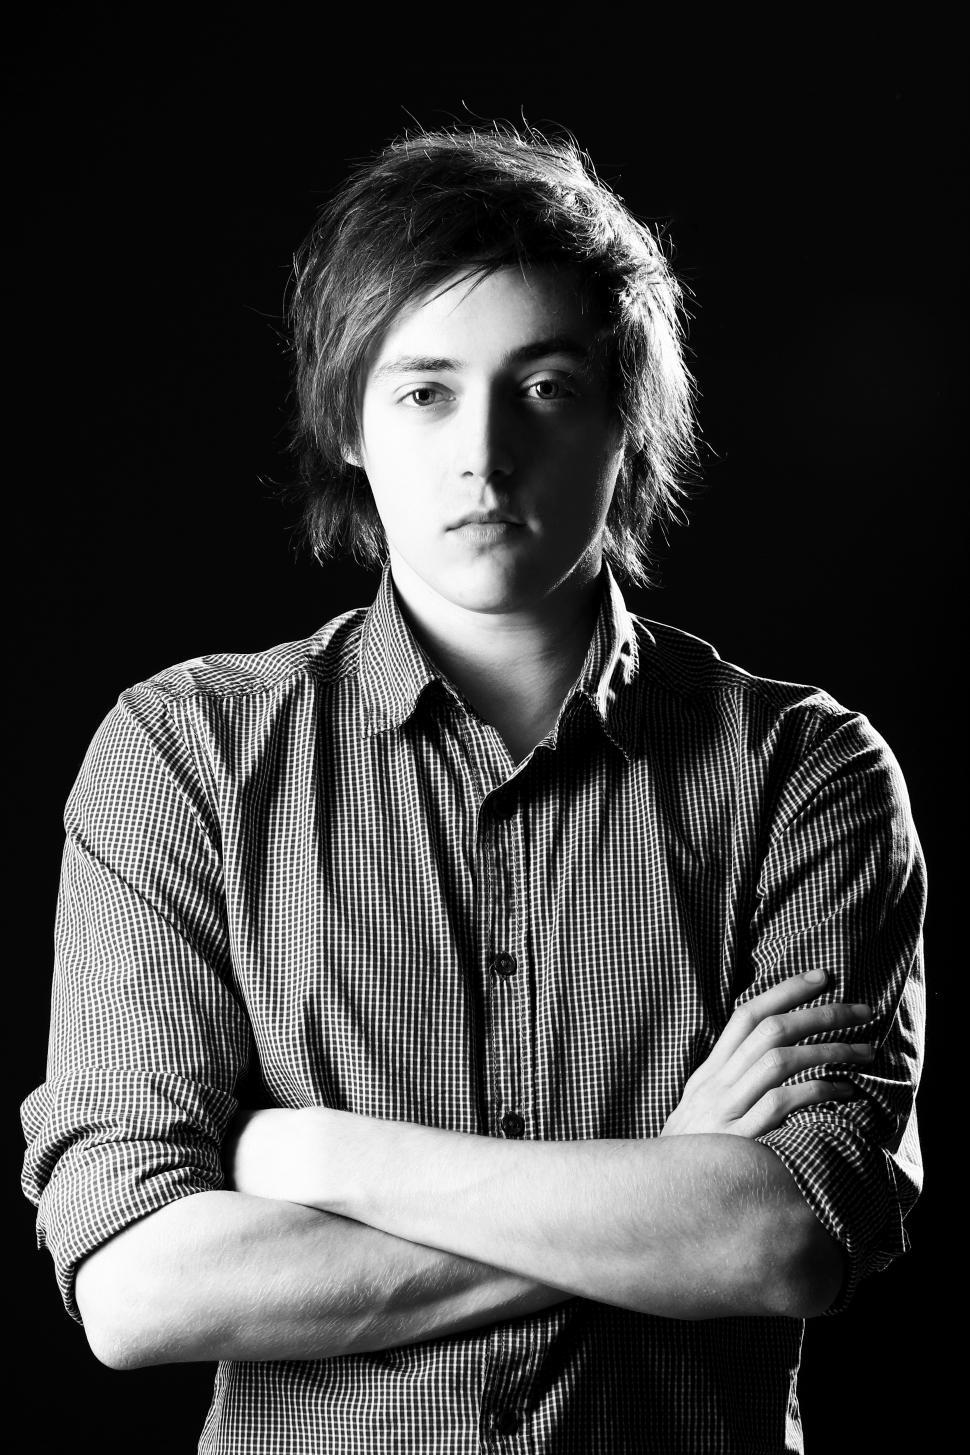 Free Image of Young guy, black and white, over black background 